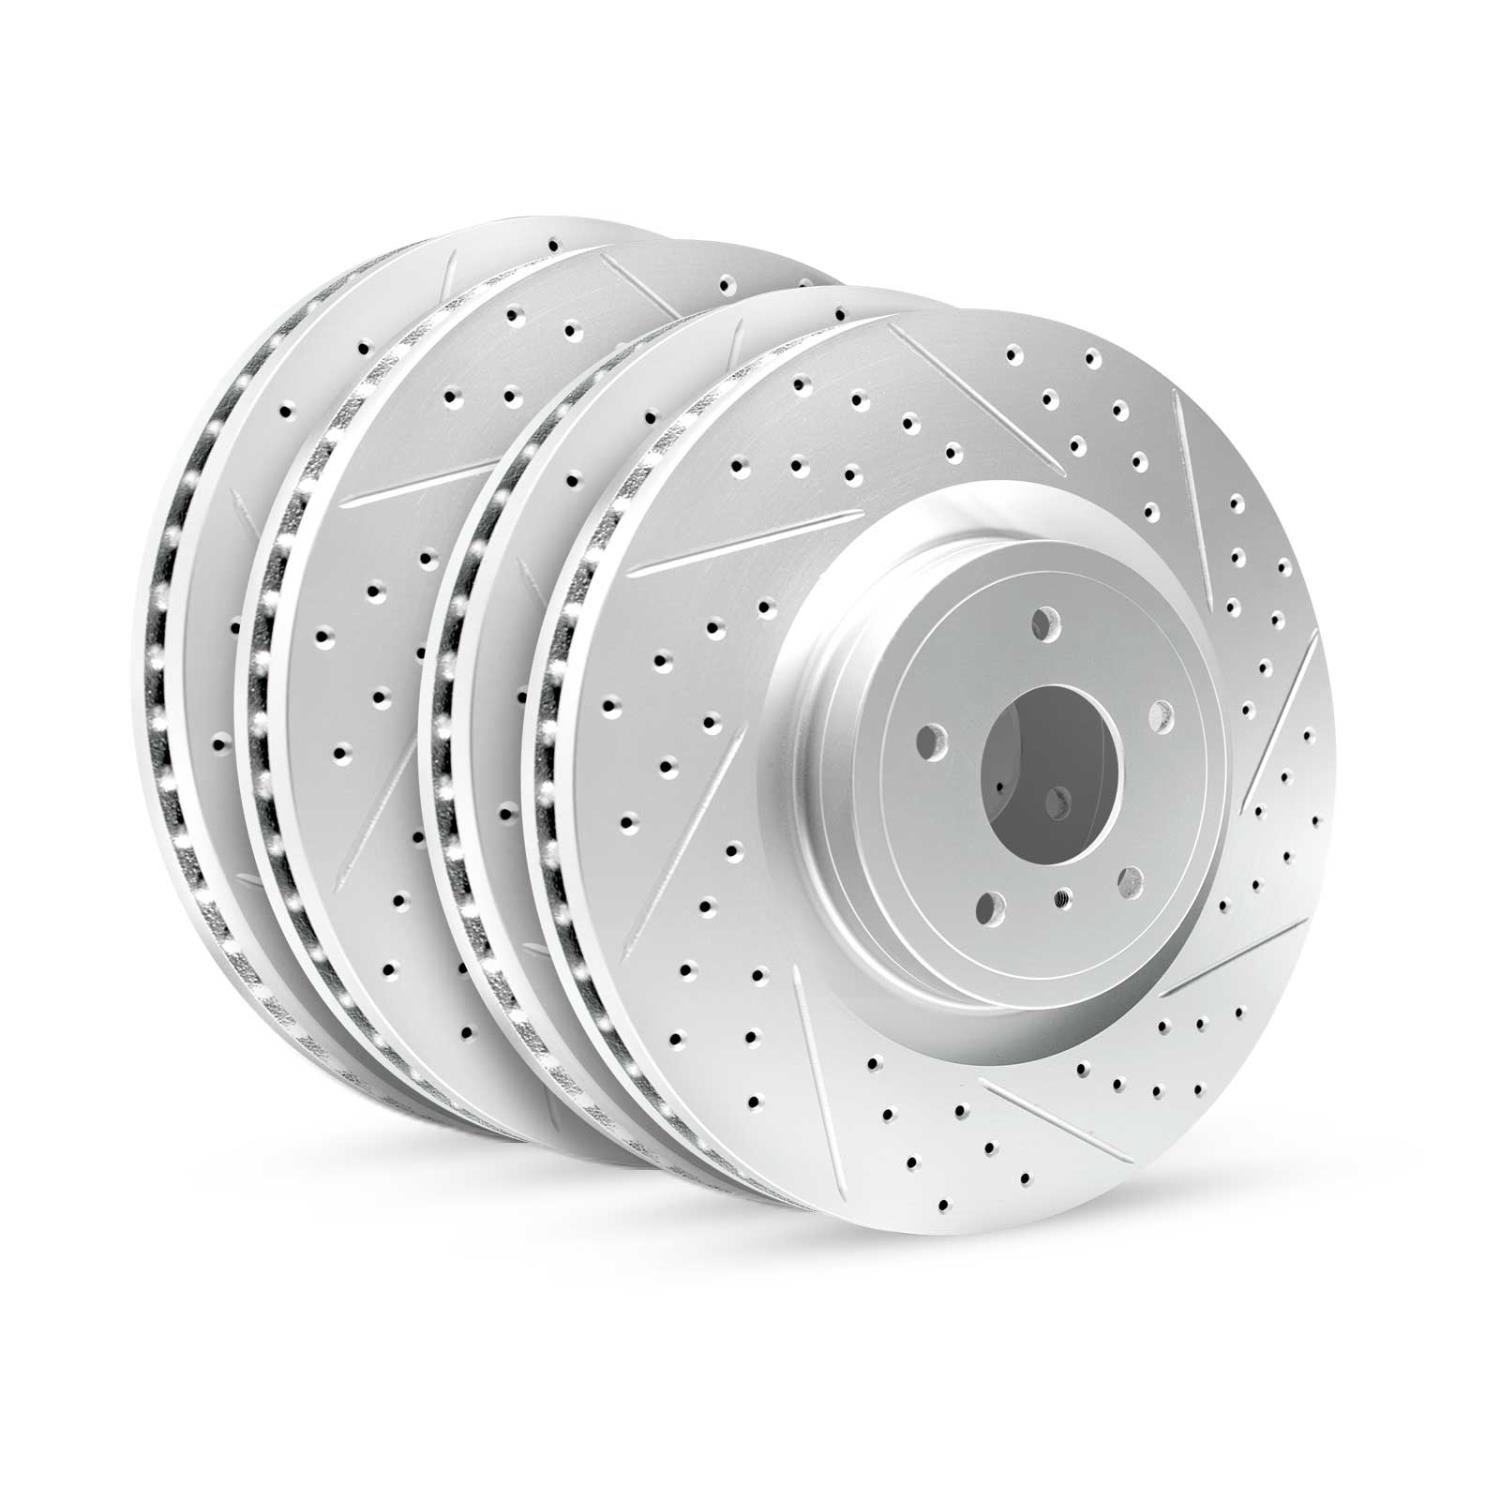 GEO-Carbon Drilled/Slotted Rotor/Drums, 1995-2005 Fits Multiple Makes/Models, Position: Front/Rear